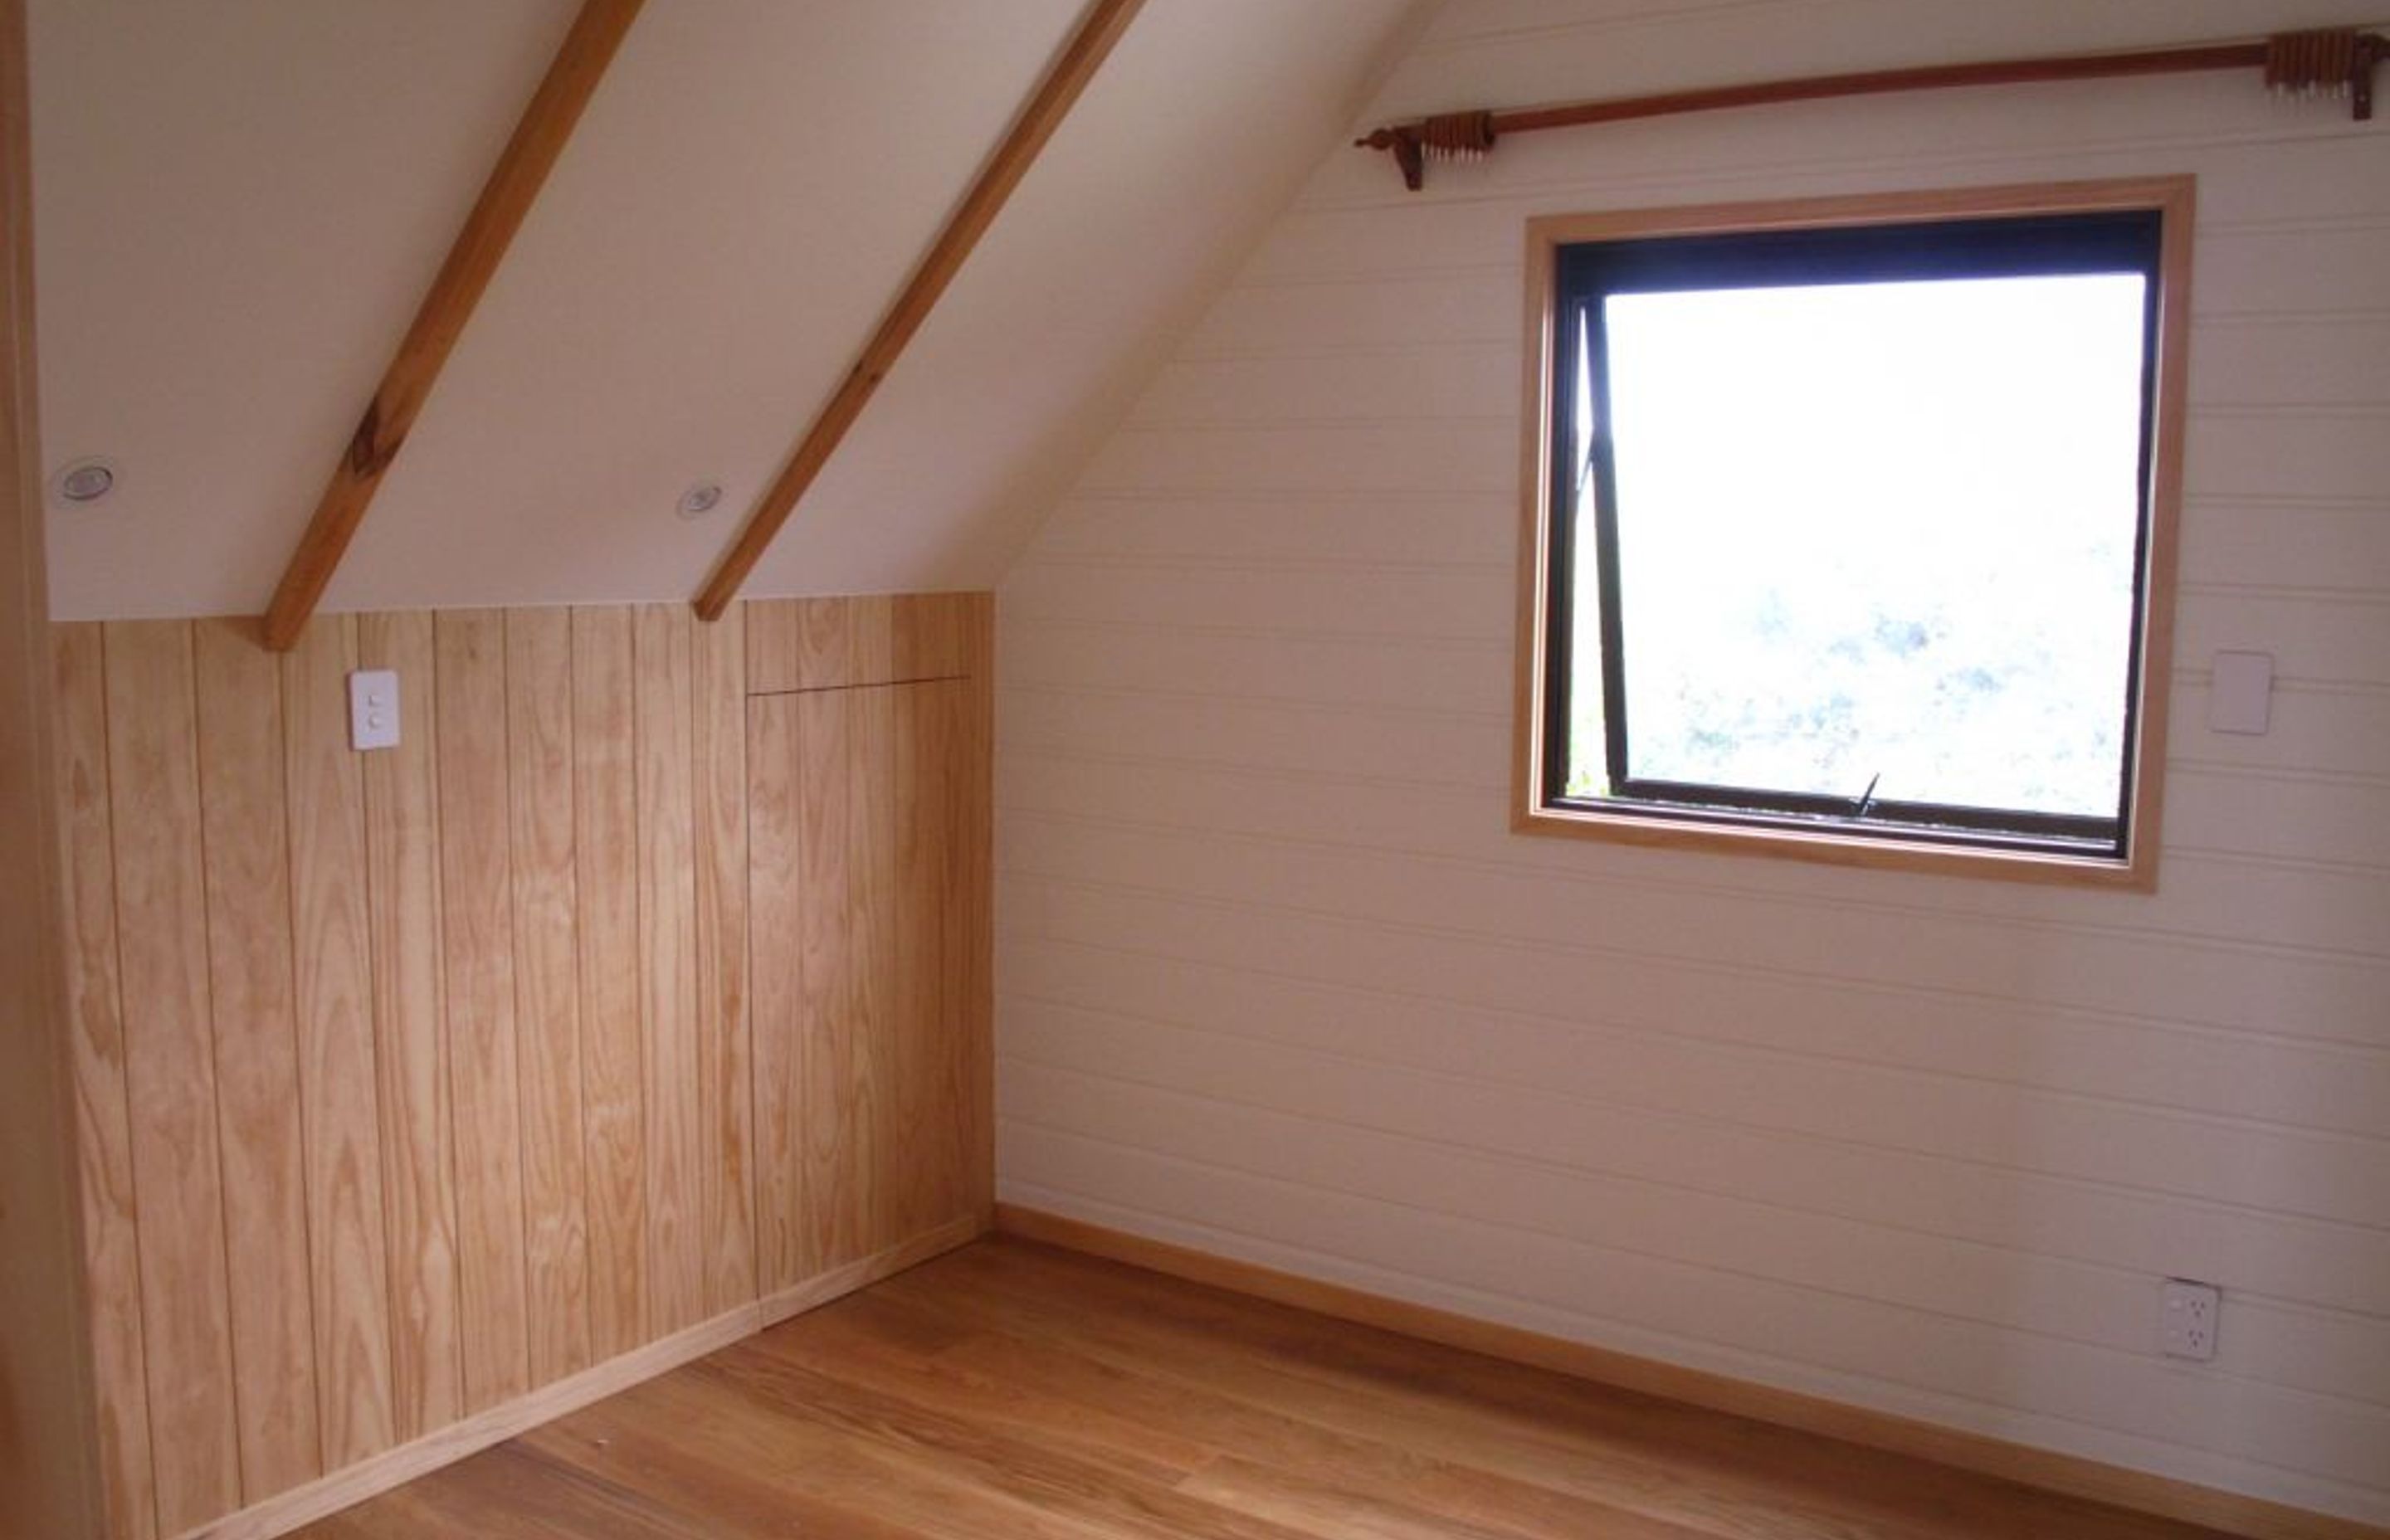 An Attic conversion on the Tutukaka Coast.  Kaiser Construction built a 1 bedroom apartment in the attic space above a garage